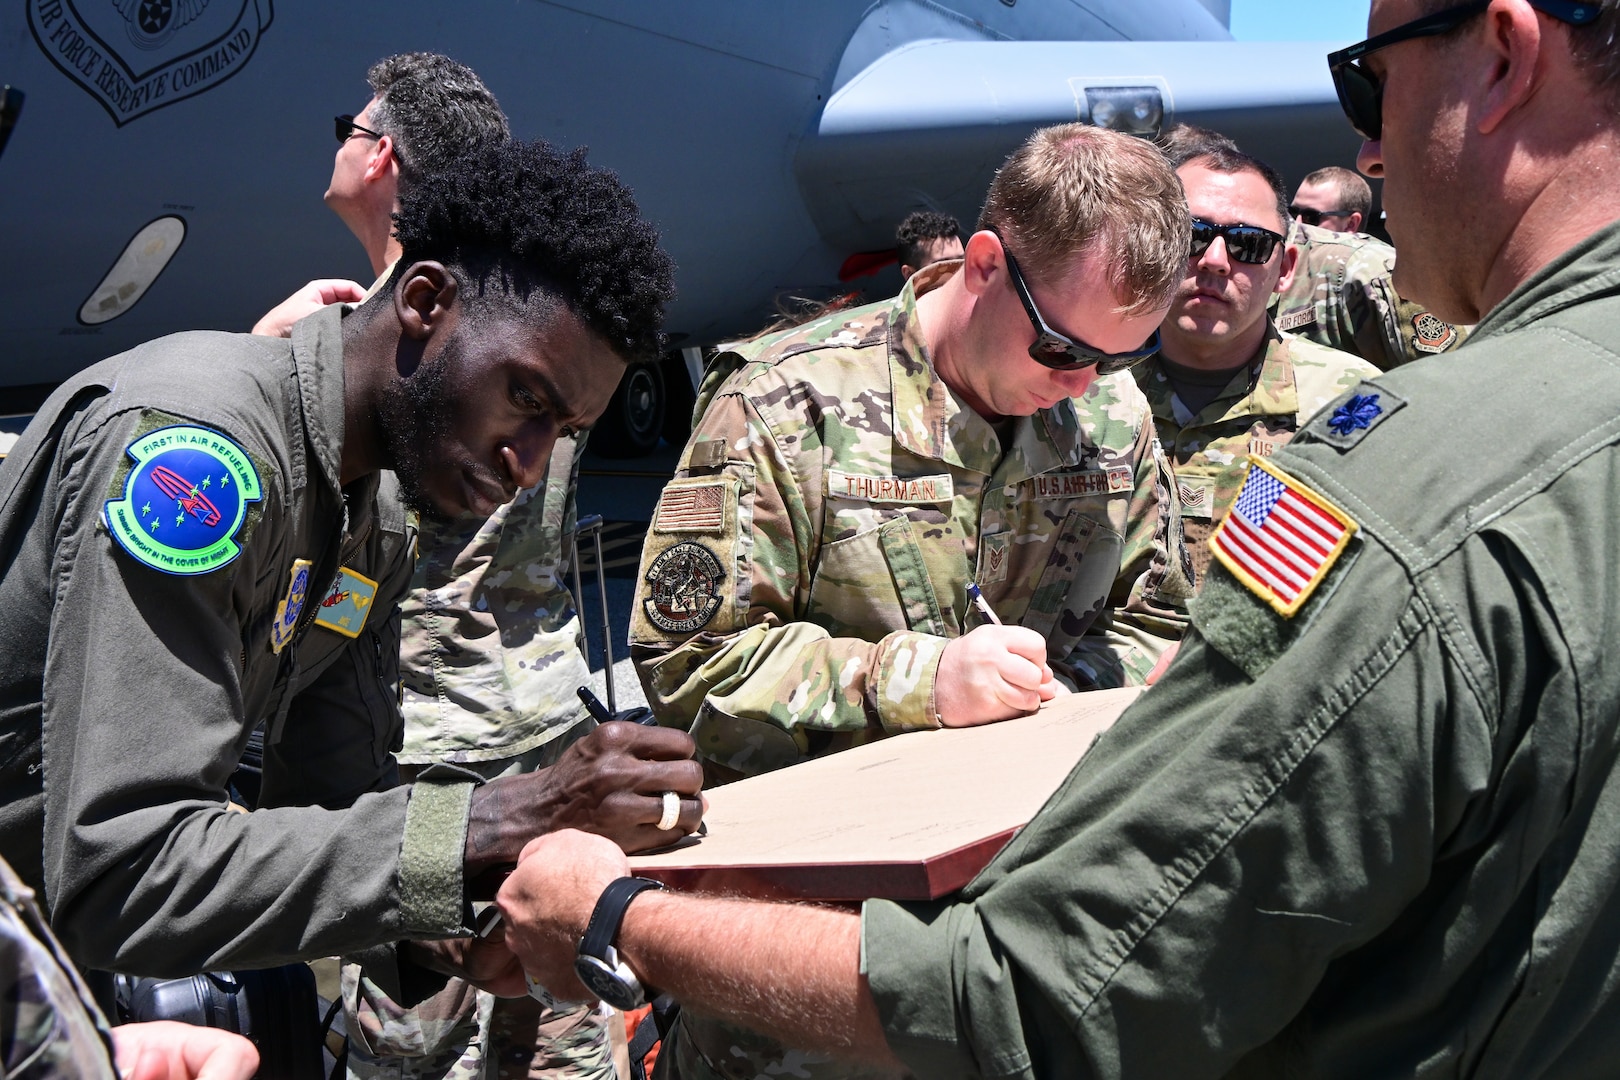 U.S. Air Force Senior Airman Jenson Kokou, left, a boom operator assigned to the 92nd Air Refueling Wing, Fairchild AFB, Washington, and U.S. Air Force Staff Sgt. Nicholas Thurman, a maintainer assigned to the 92nd Aircraft Maintenance Squadron, sign their names on the back of a lithograph in Perth, Australia, Jan. 27, 2023. During each stop of Operation Vespucci, local community members were presented with lithographs to recognize and enhance partnerships with numerous countries in the Southern Hemisphere. (U.S. Air Force photo by 2nd Lt. Kristin Nielsen)